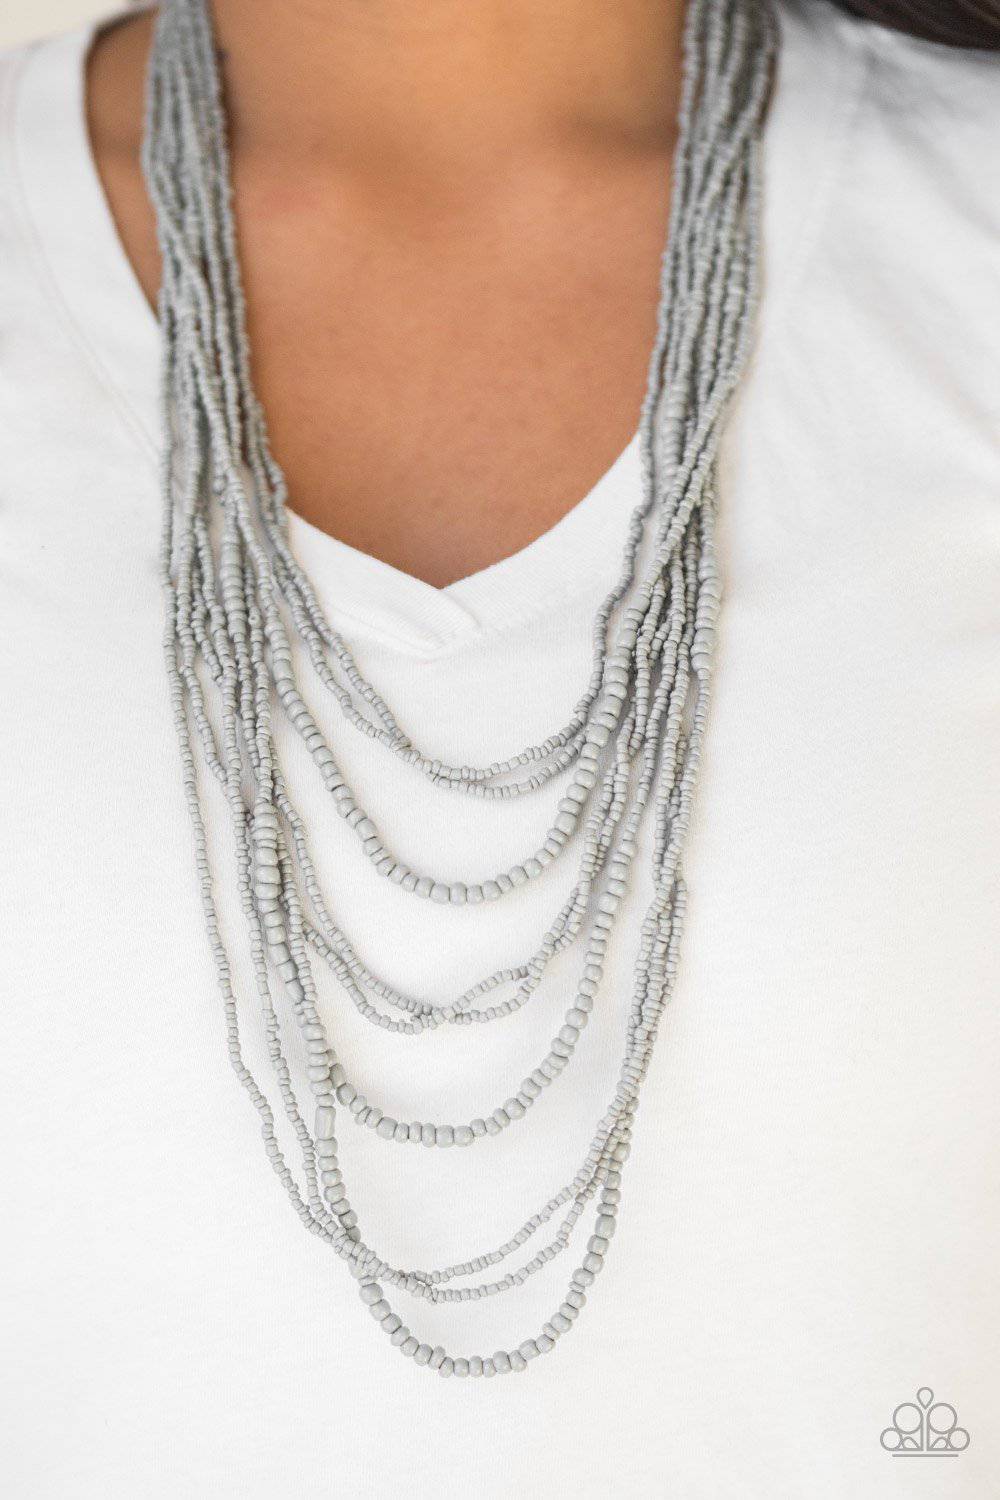 Totally Tonga - Silver Seed Bead Necklace - Paparazzi Accessories - GlaMarous Titi Jewels